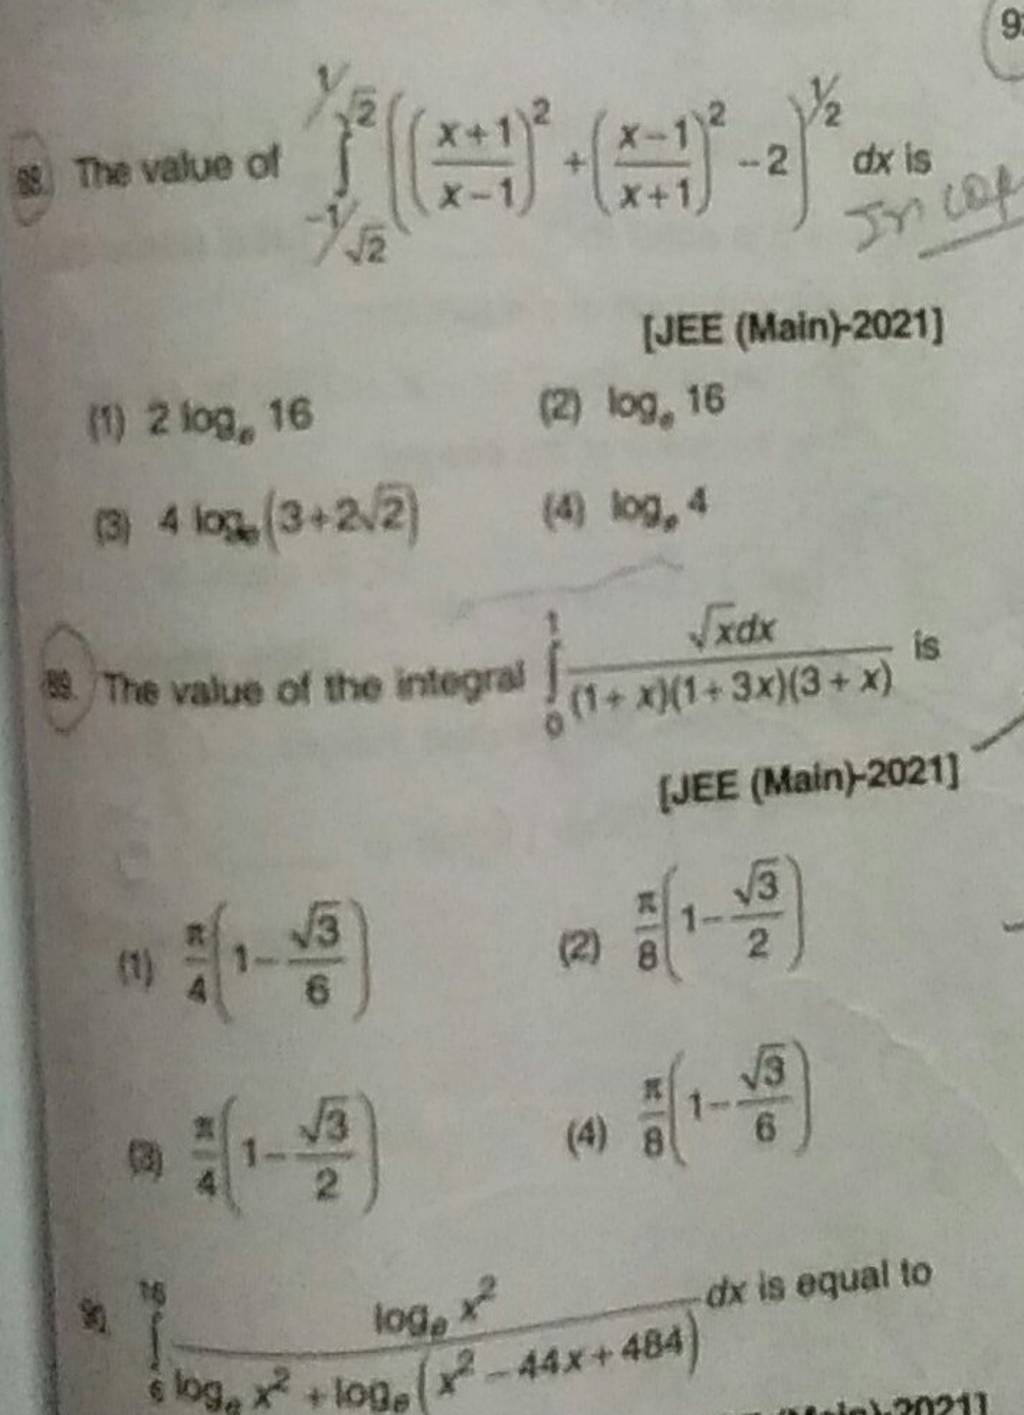 The value of ∫−1/2​2​​((x−1x+1​)2+(x+1x−1​)2−2)1/2dx is sr2 (of [JEE (